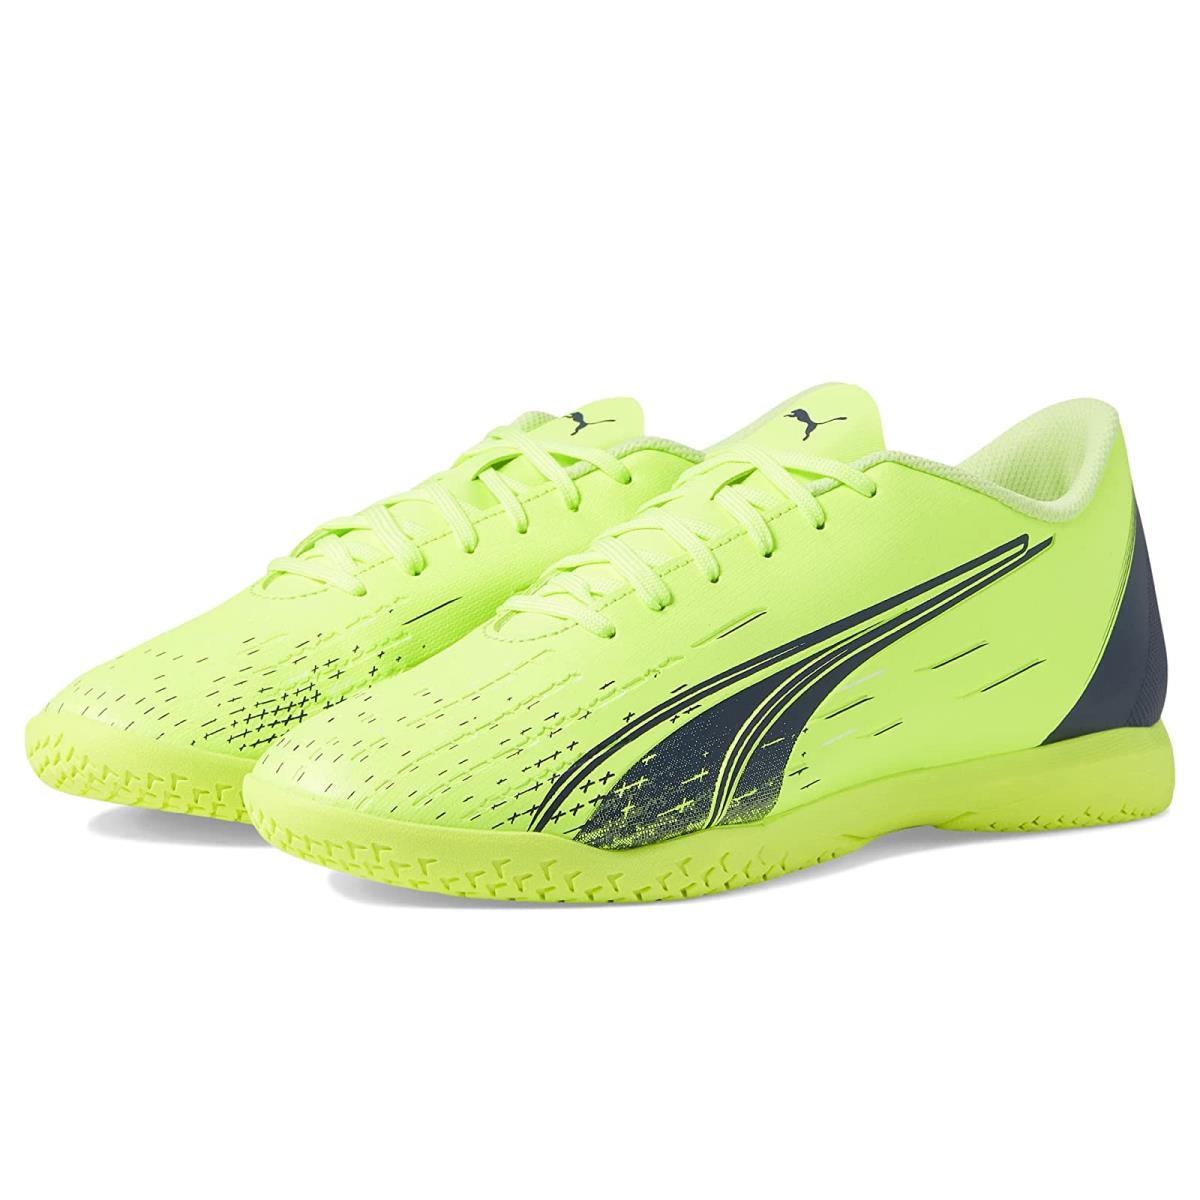 Man`s Sneakers Athletic Shoes Puma Ultra Play Indoor Training Fizzy Light/Parisian Night/Blue Glimmer